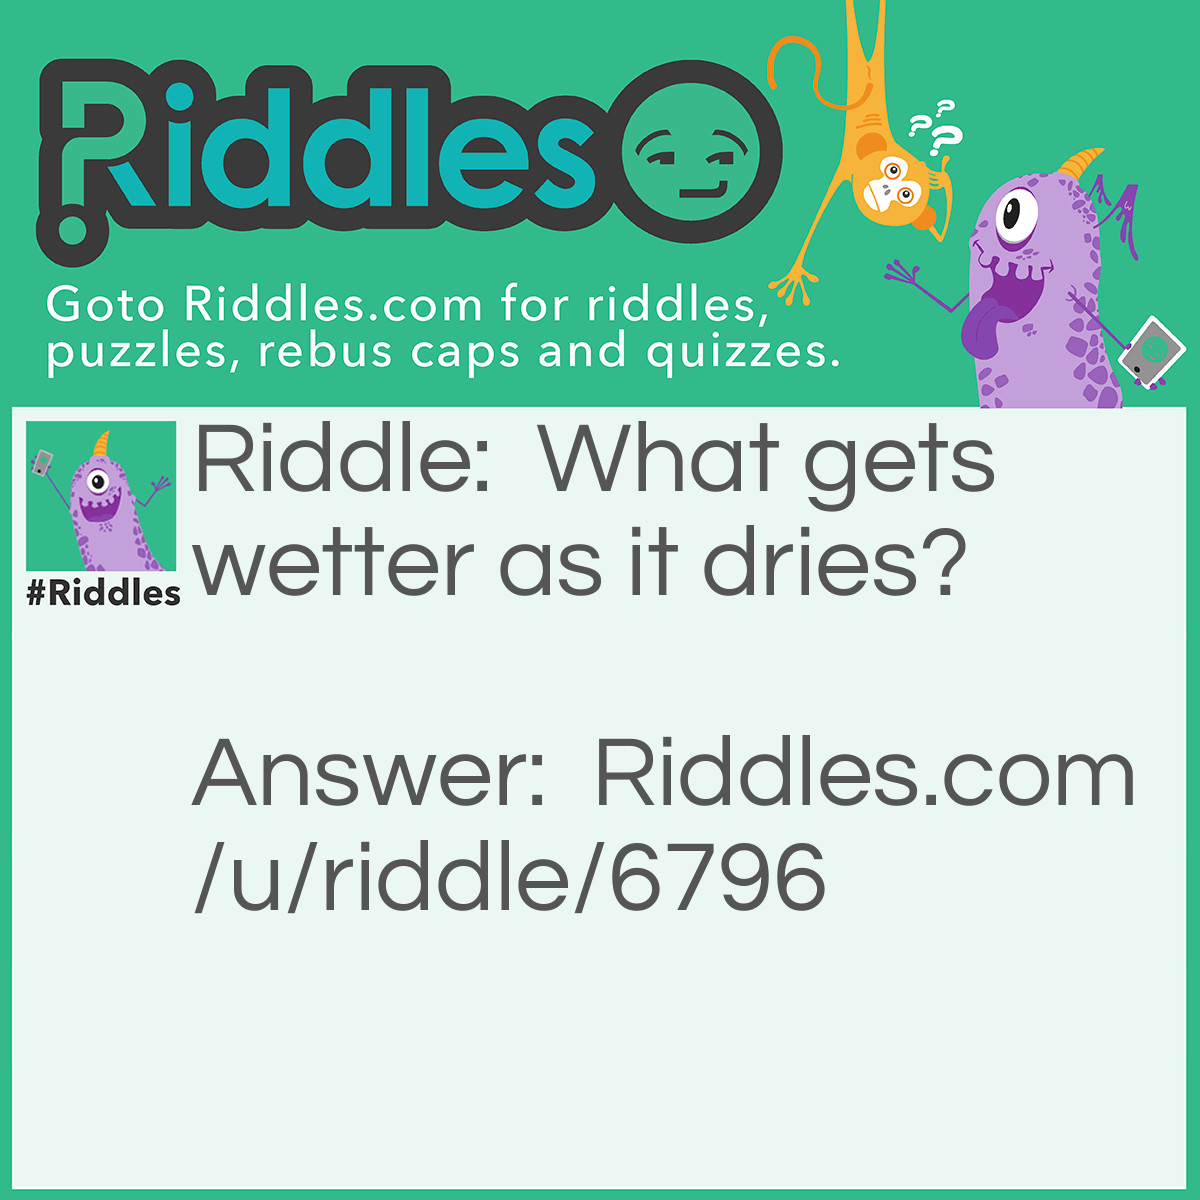 Riddle: What gets wetter as it dries? Answer: A Towel.